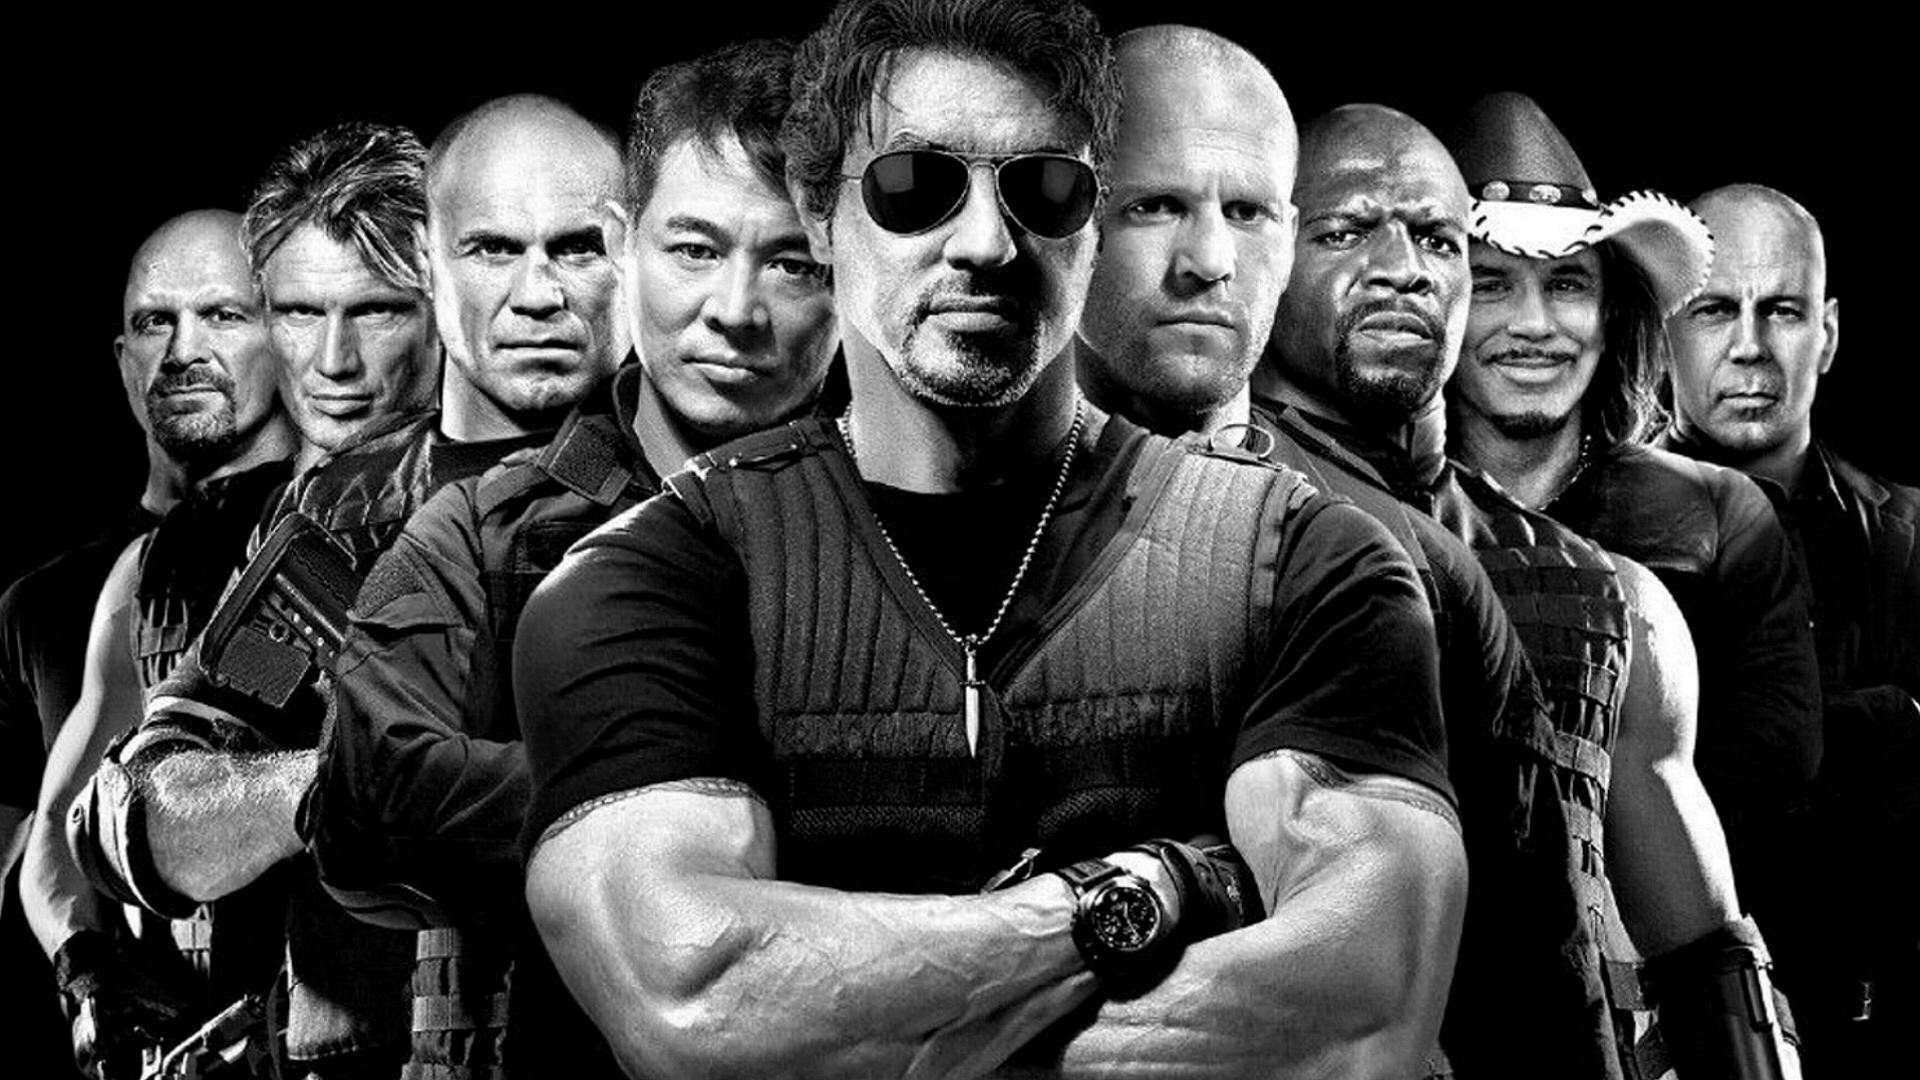 1920x1080 The Expendables Wallpapers Widescreen Full Hd 1080p